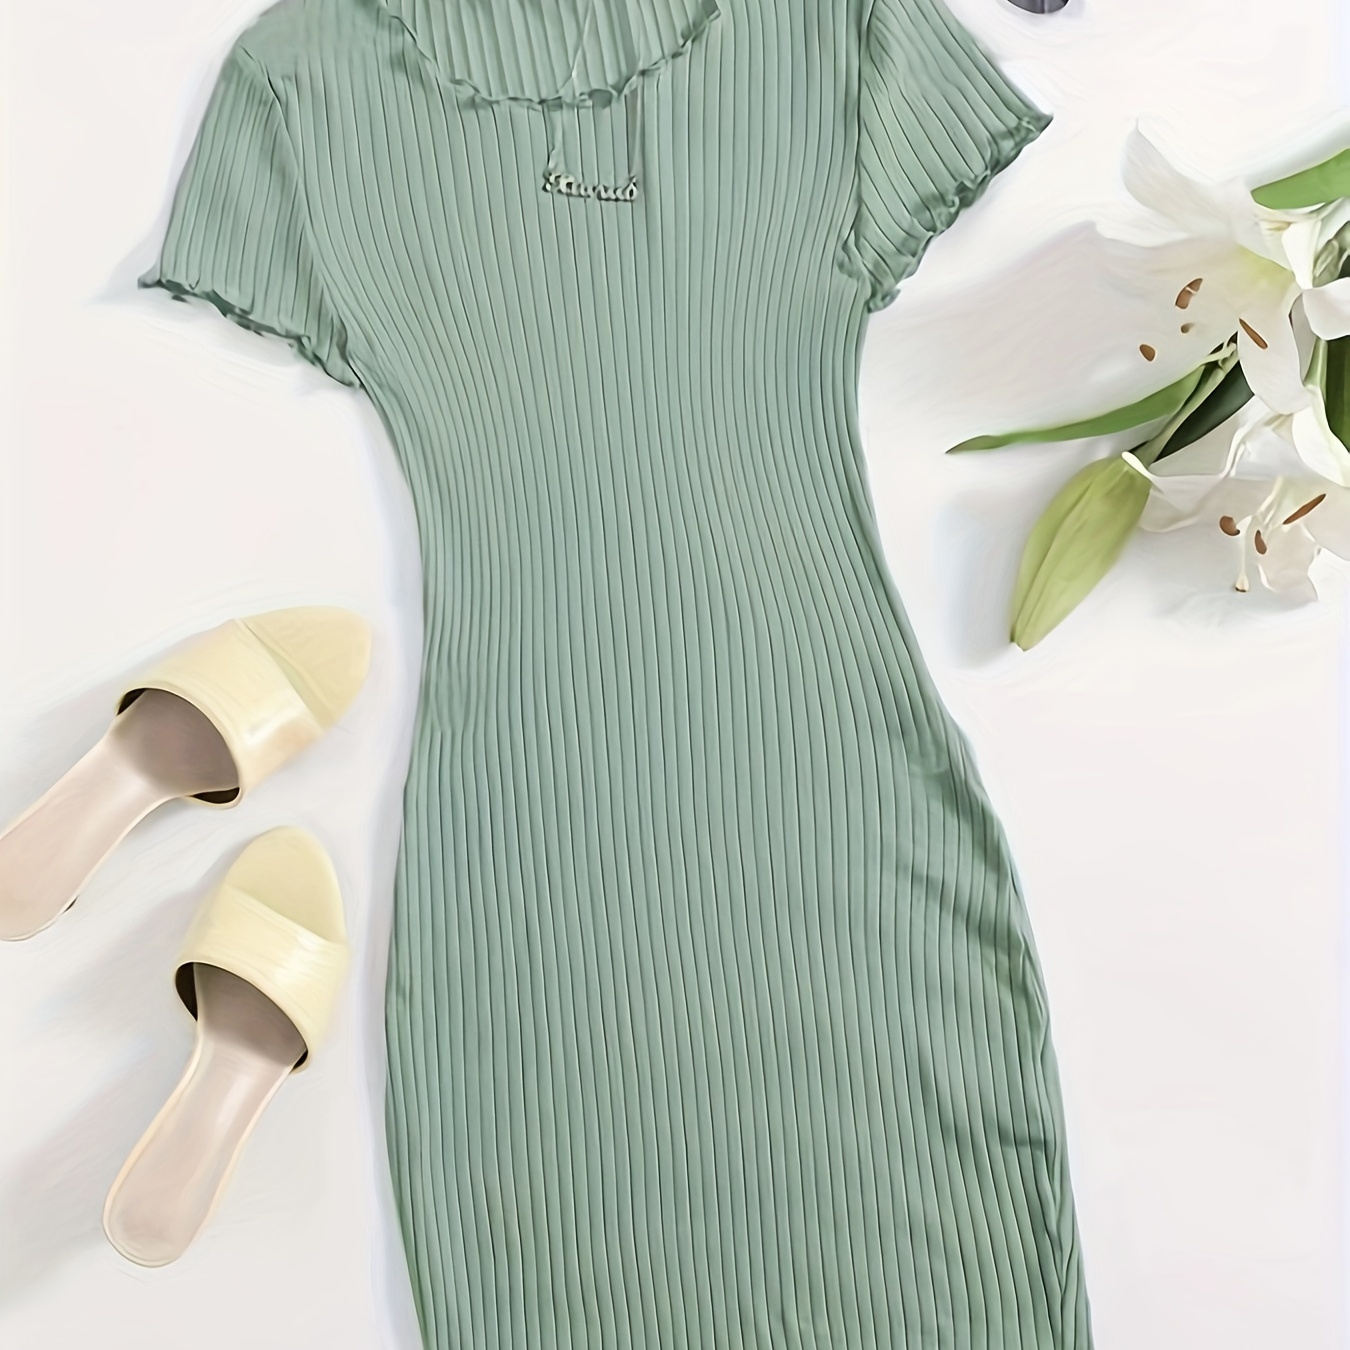 

Ribbed Solid Color Dress, Casual Short Sleeve Lettuce Trim Dress For Spring & Summer, Women's Clothing